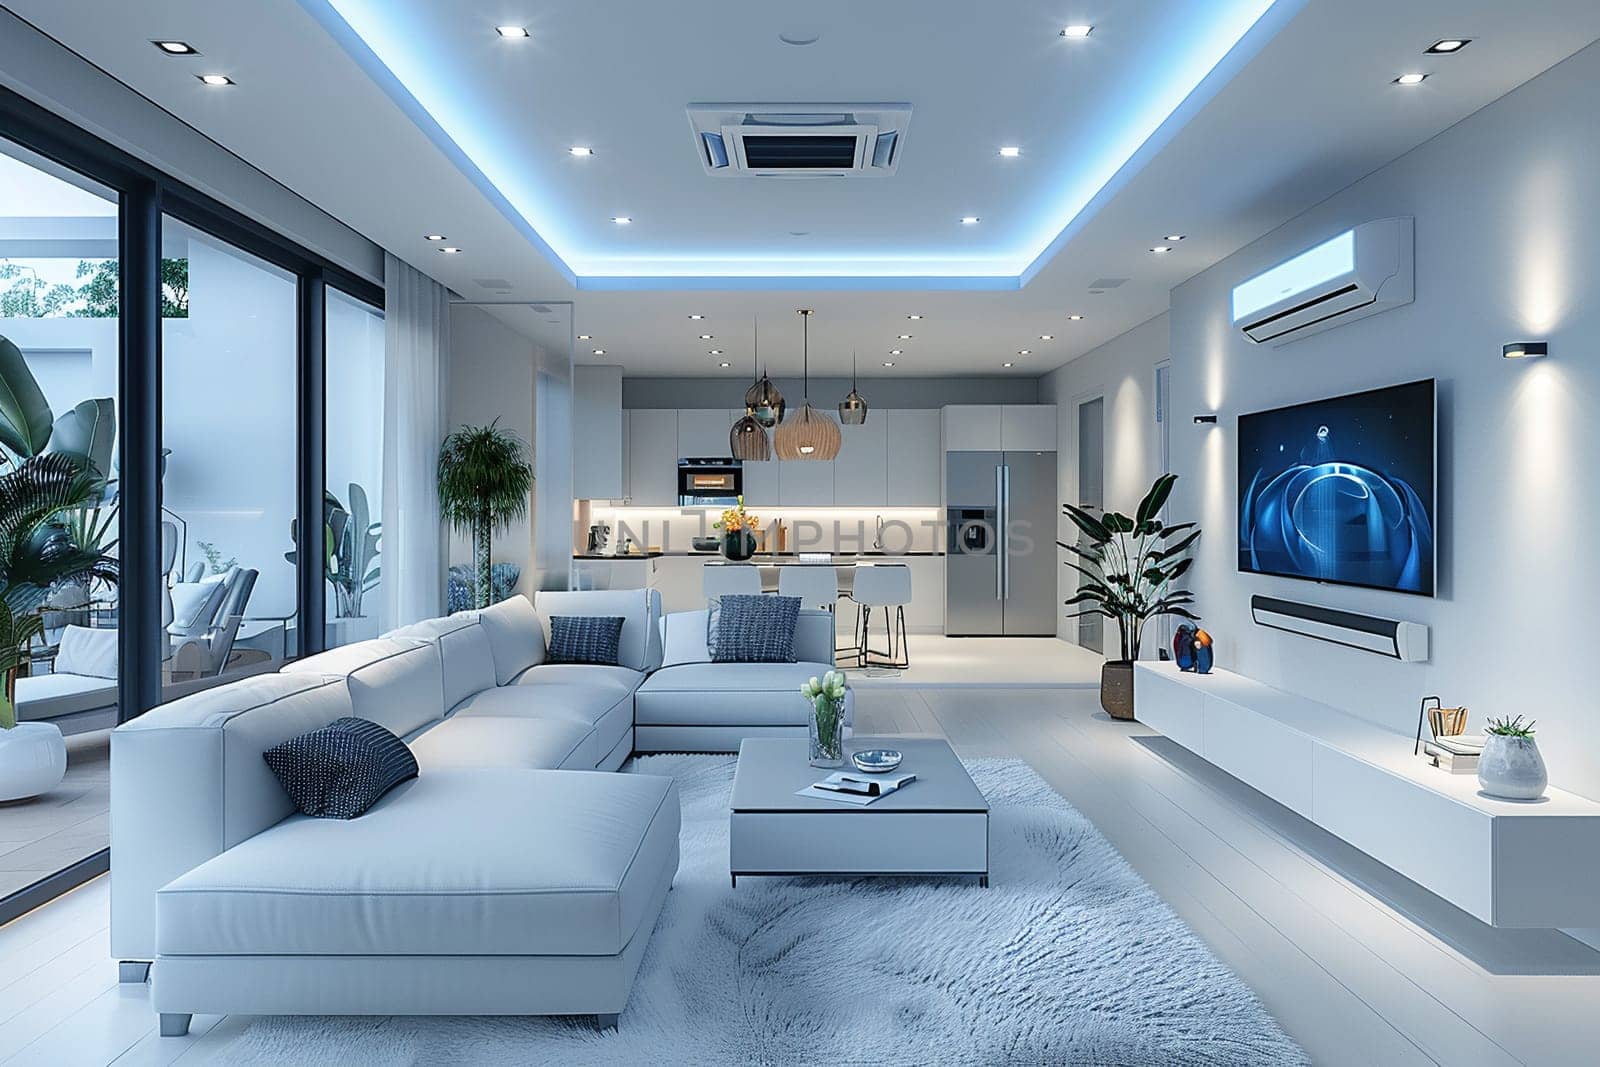 High-tech smart home living room with integrated technology and sleek furnitureHyperrealistic